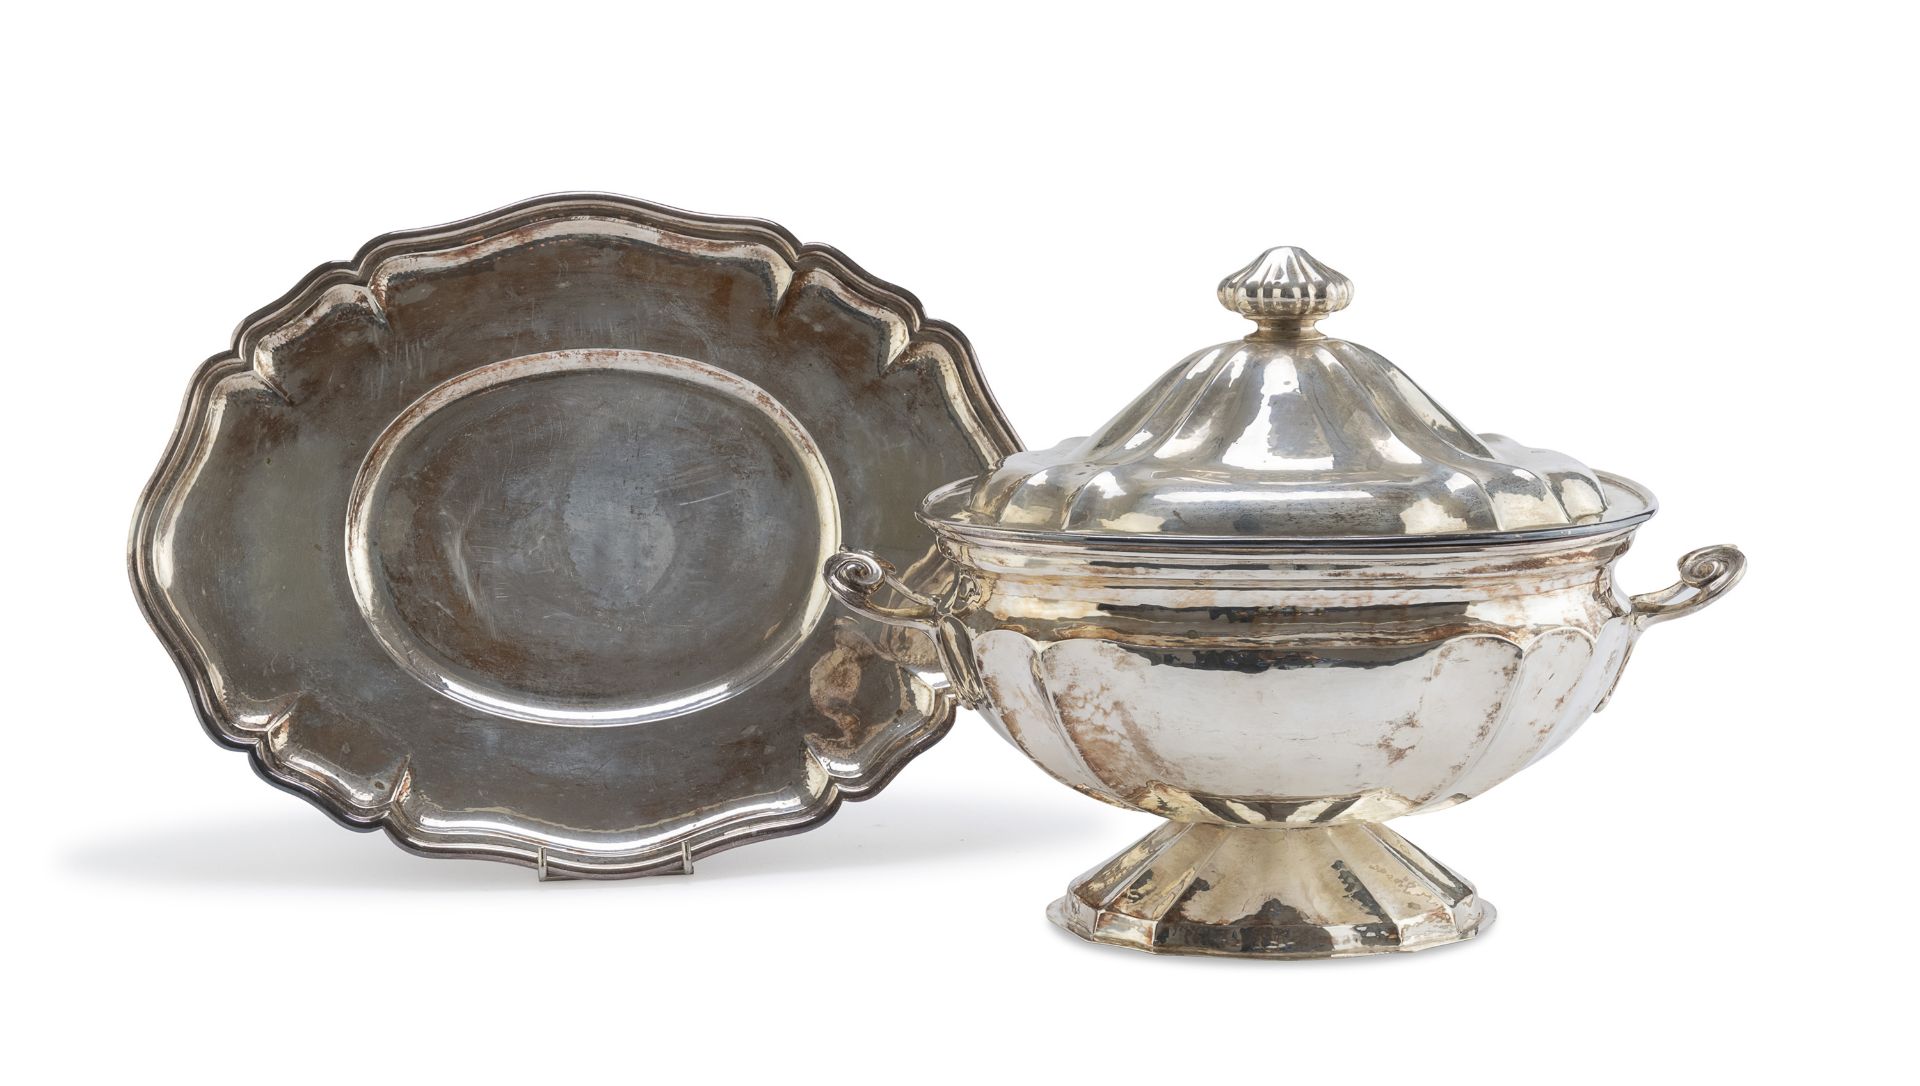 SILVER TUREEN AND PLATE VICENZA POST 1968